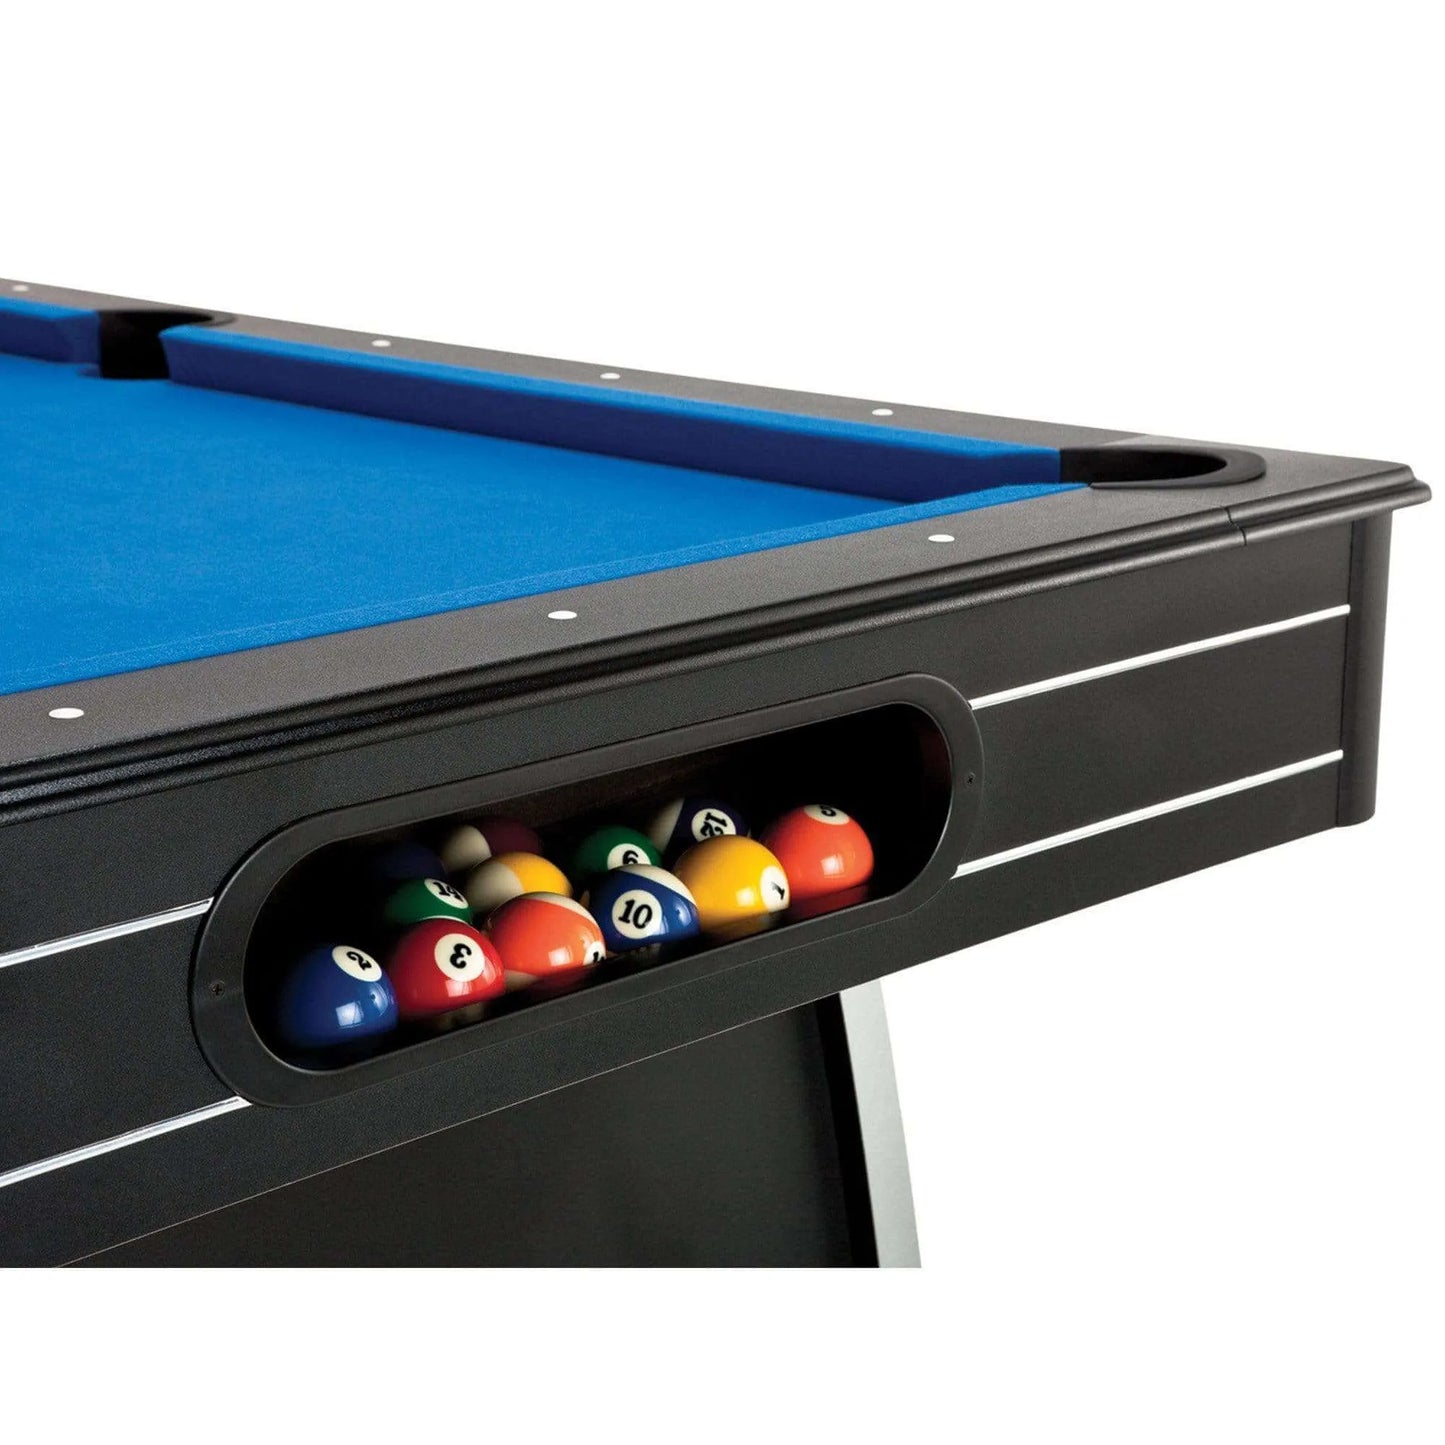 Fat Cat Tucson 7' Pool Table with Ball Return ball storage